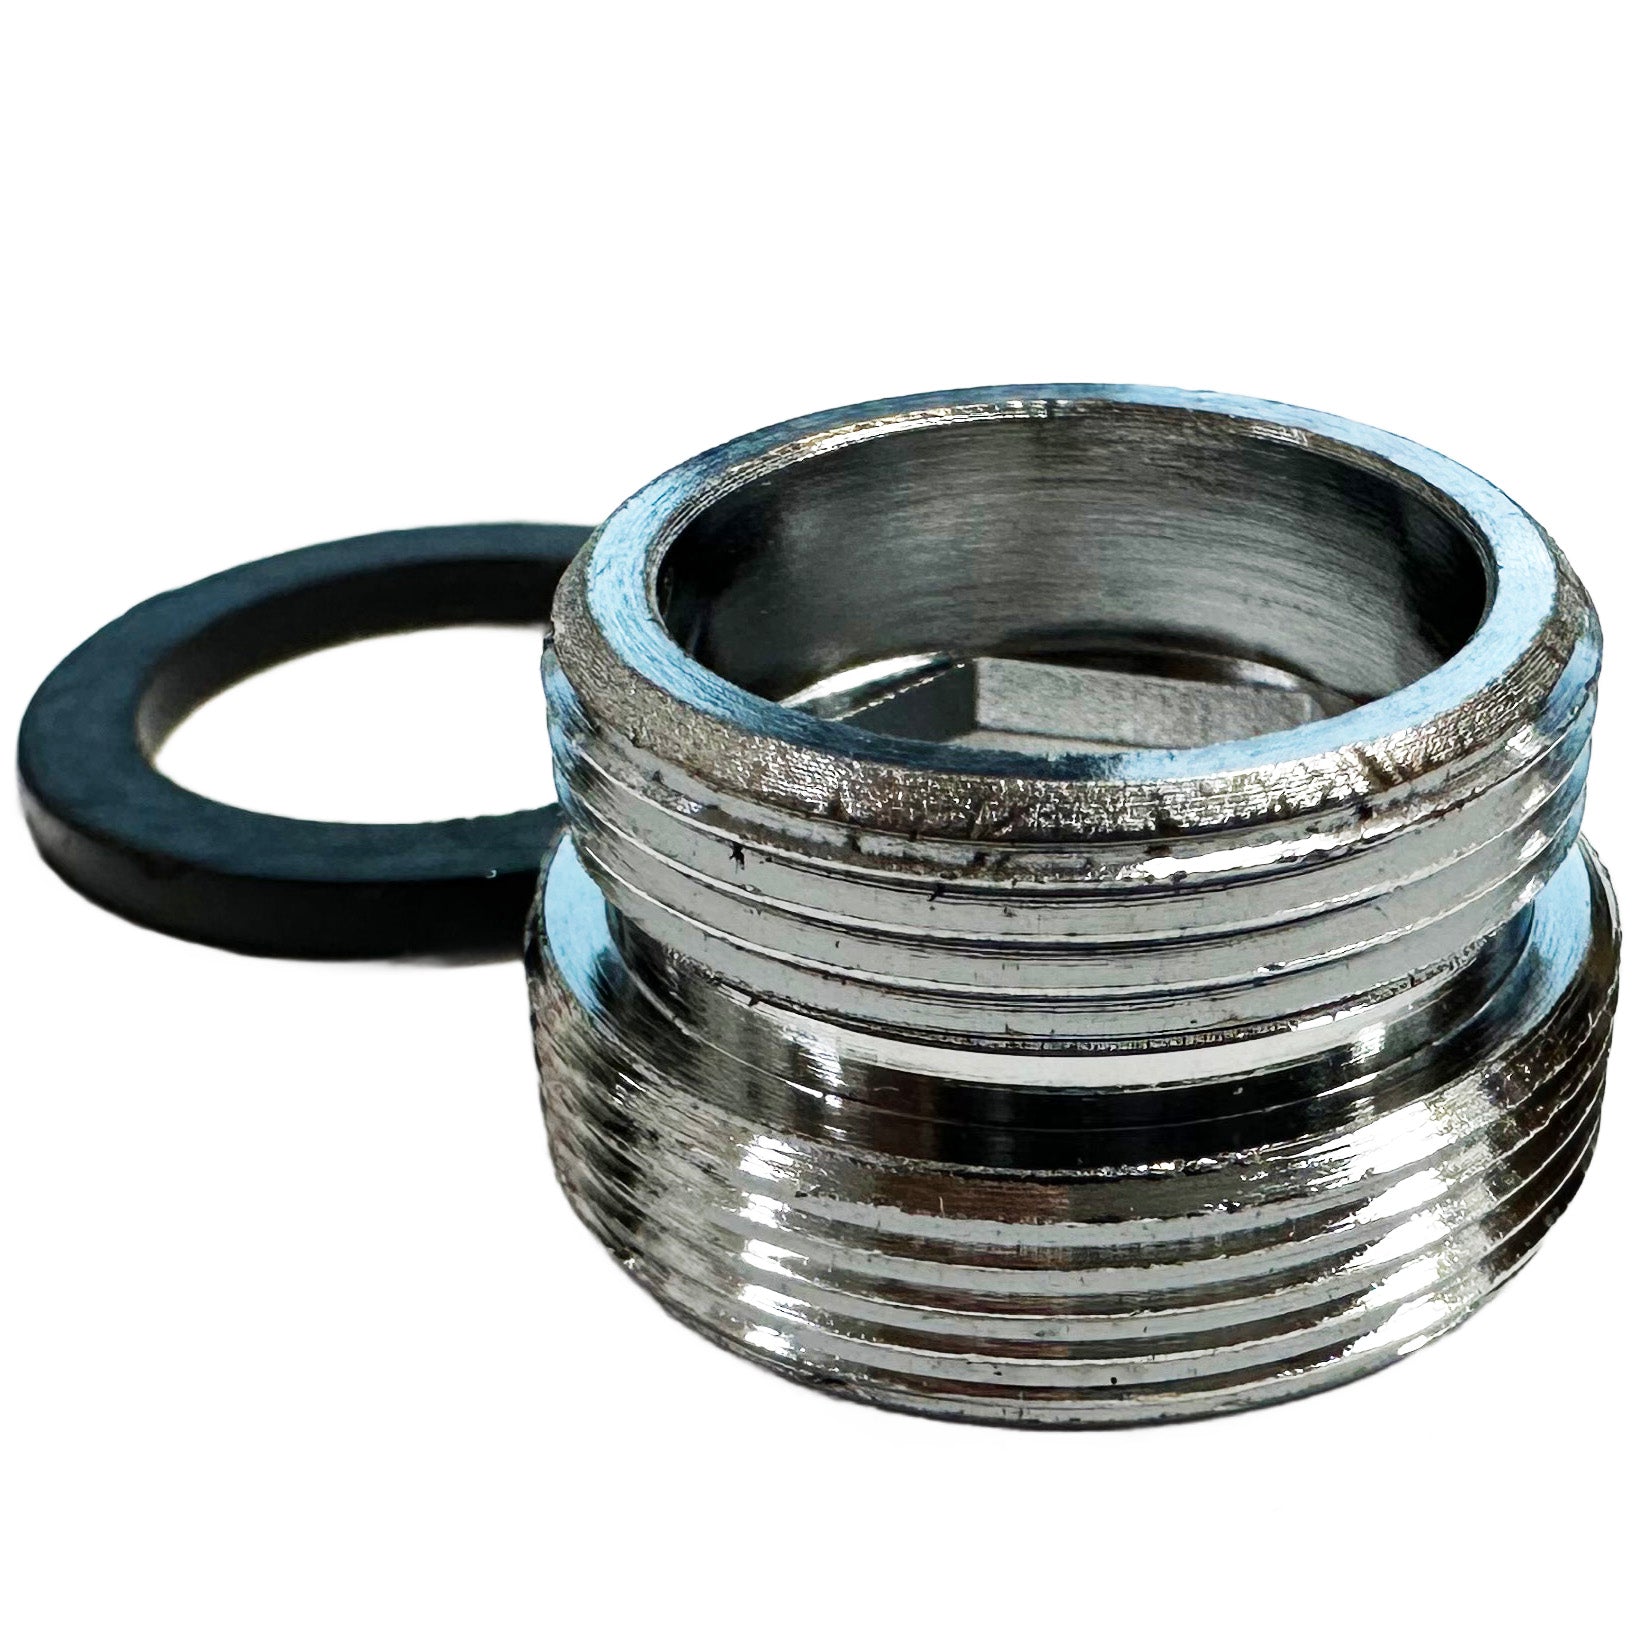 Adapter: 20mm male by 22mm (55/64